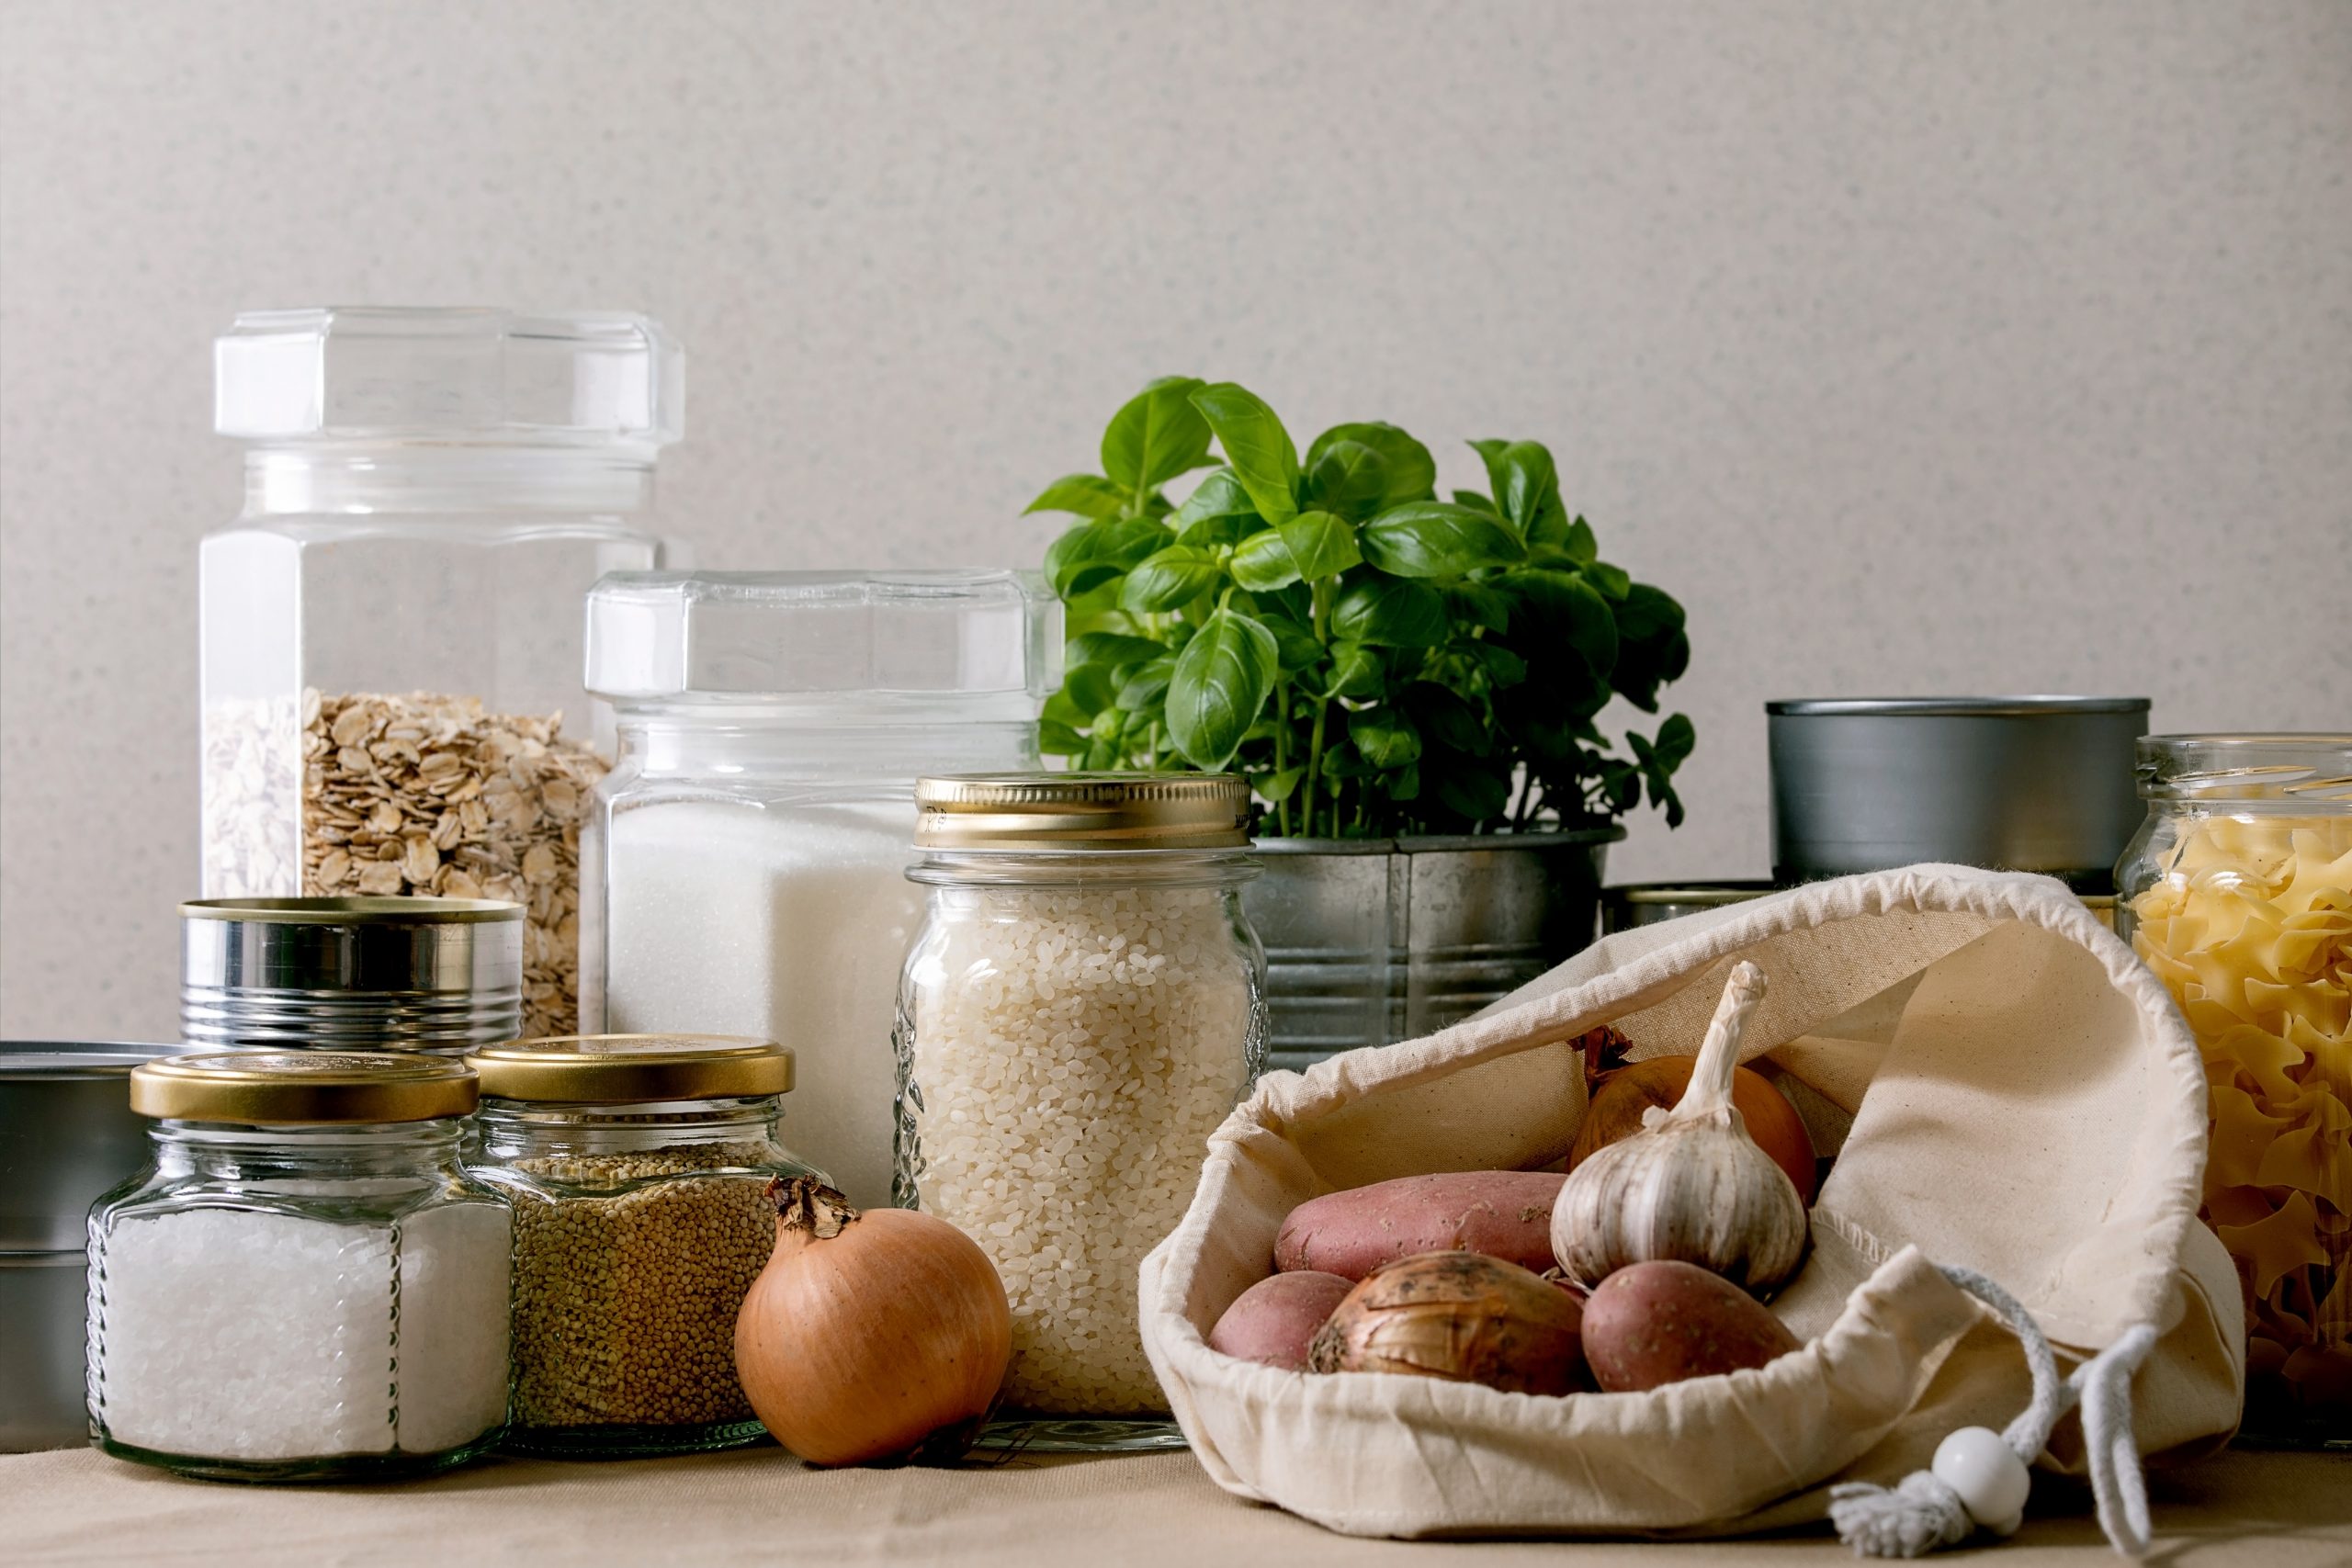 How To Save Money With An Organized Pantry